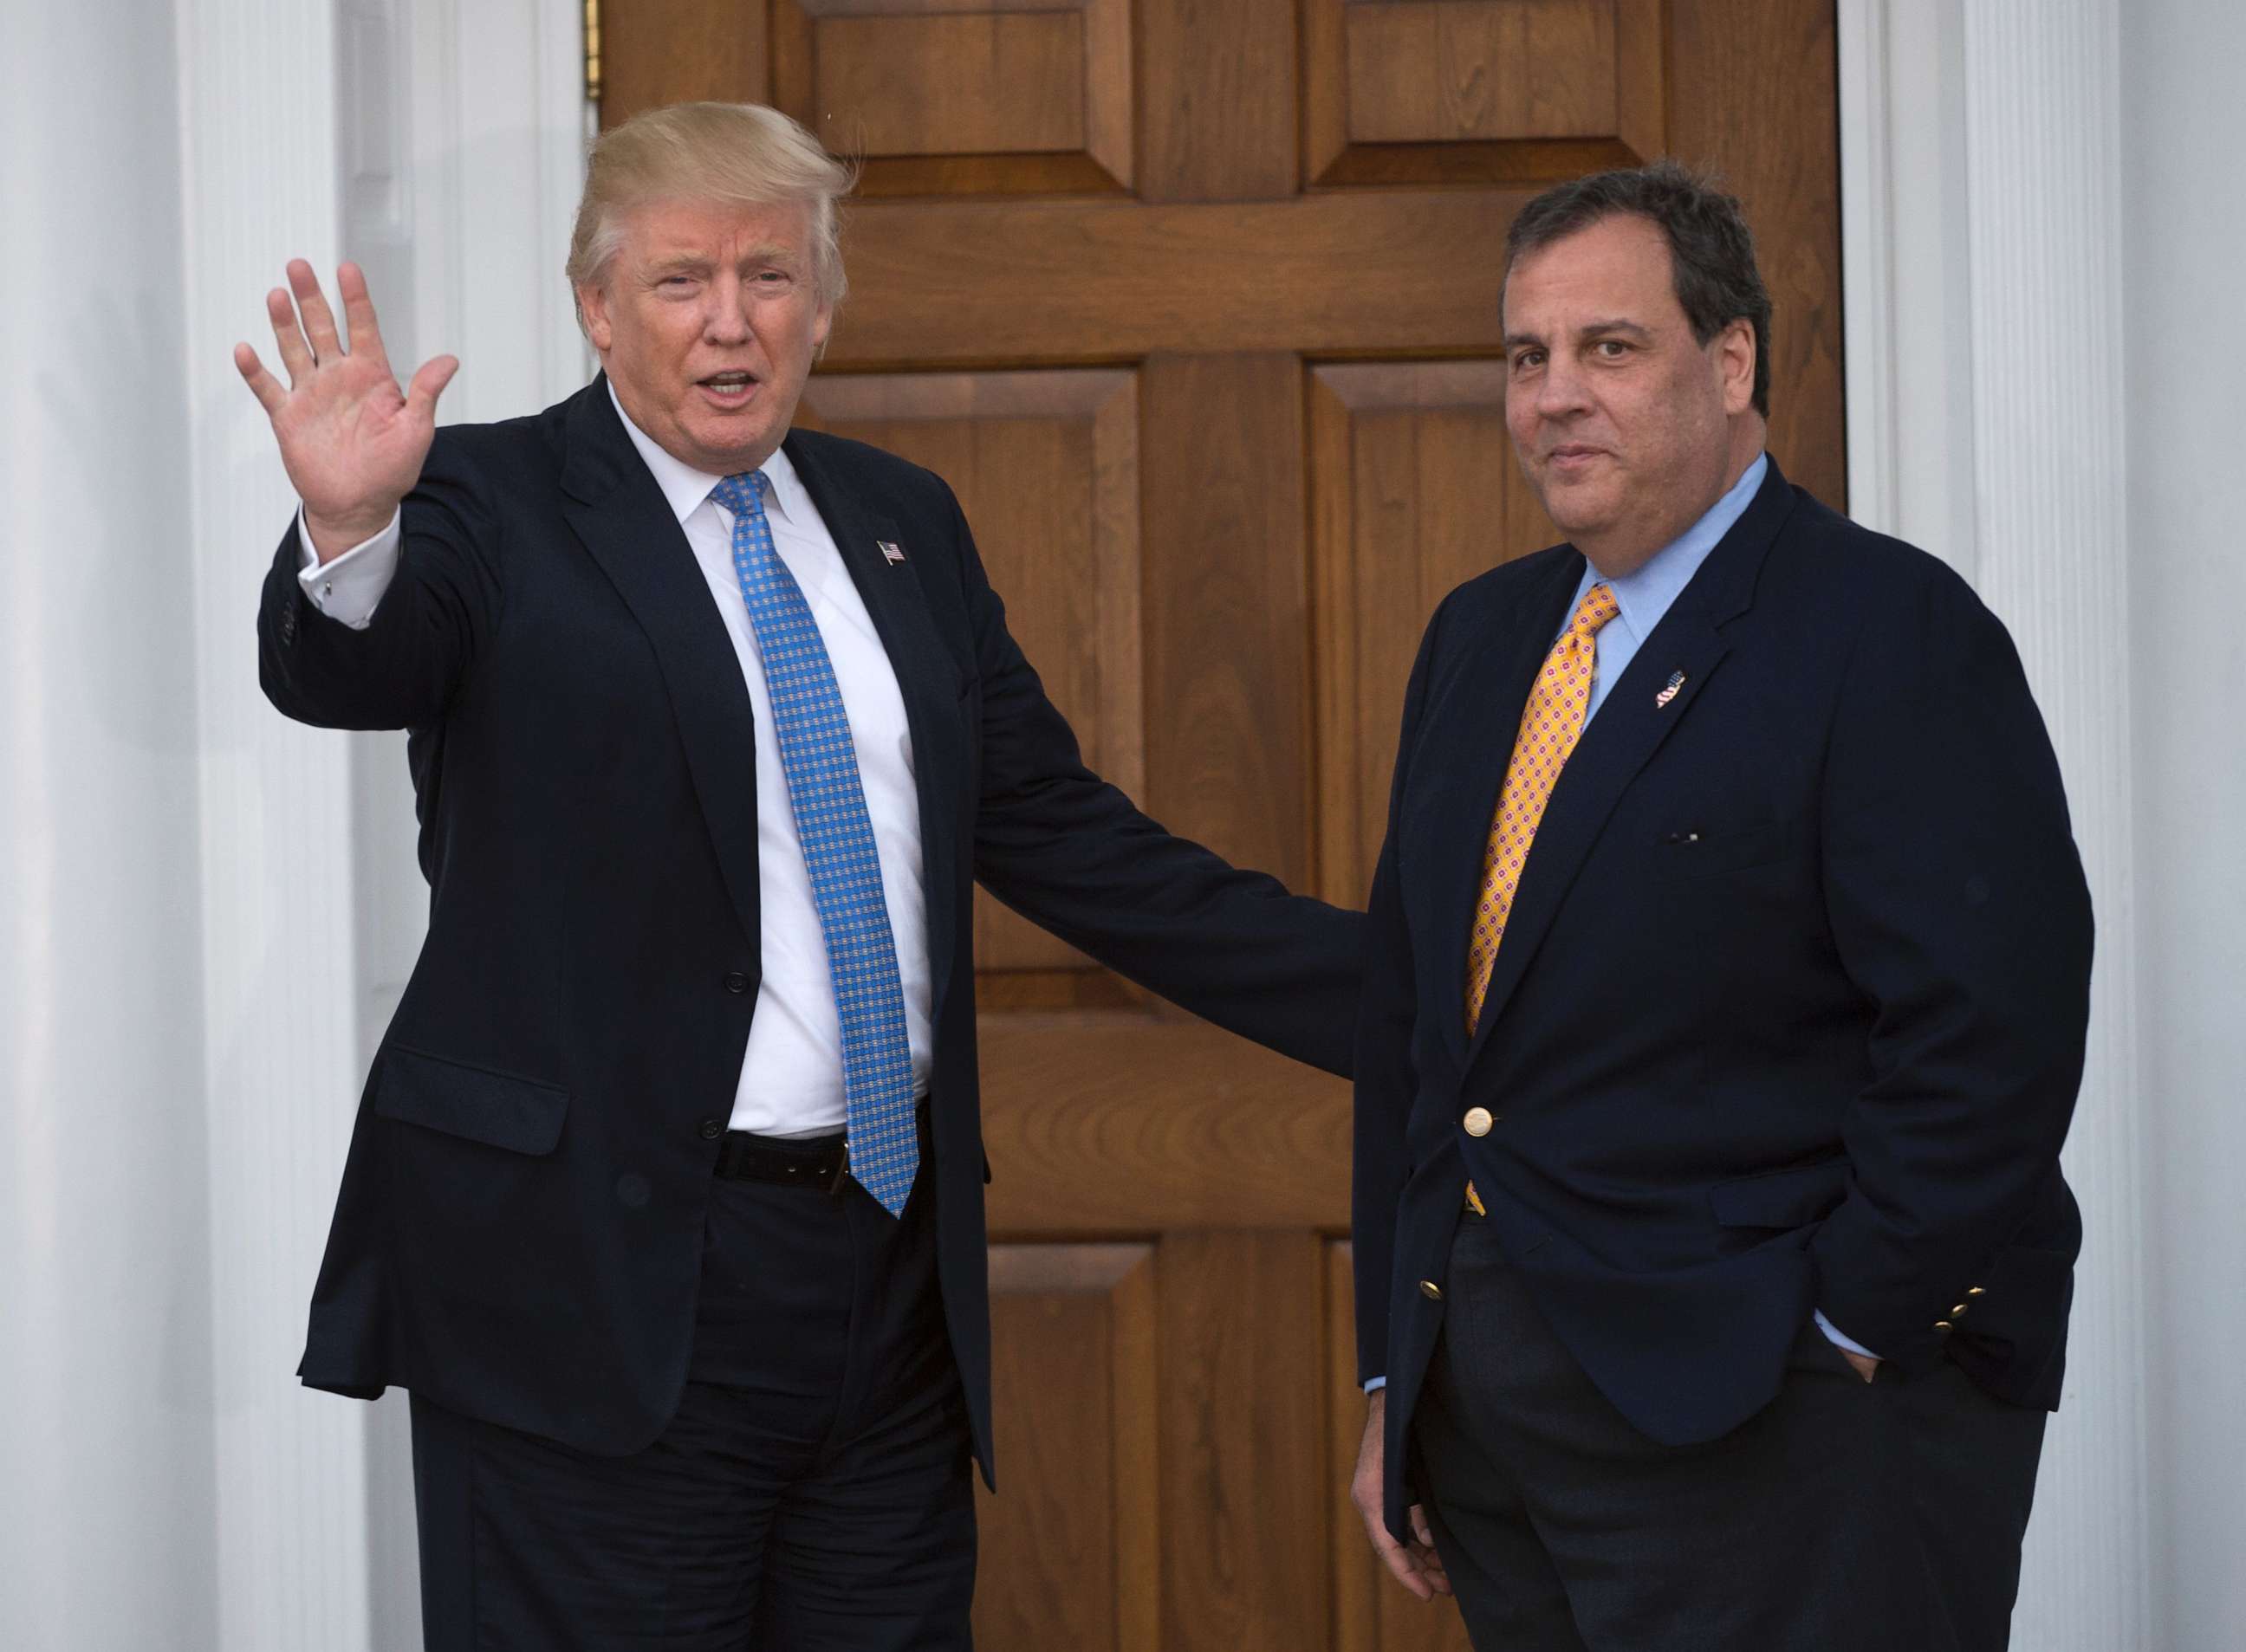 PHOTO: President-elect Donald Trump meets with New Jersey Governor Chris Christie at Trump National Golf Club Nov. 20, 2016 in Bedminster, New Jersey.